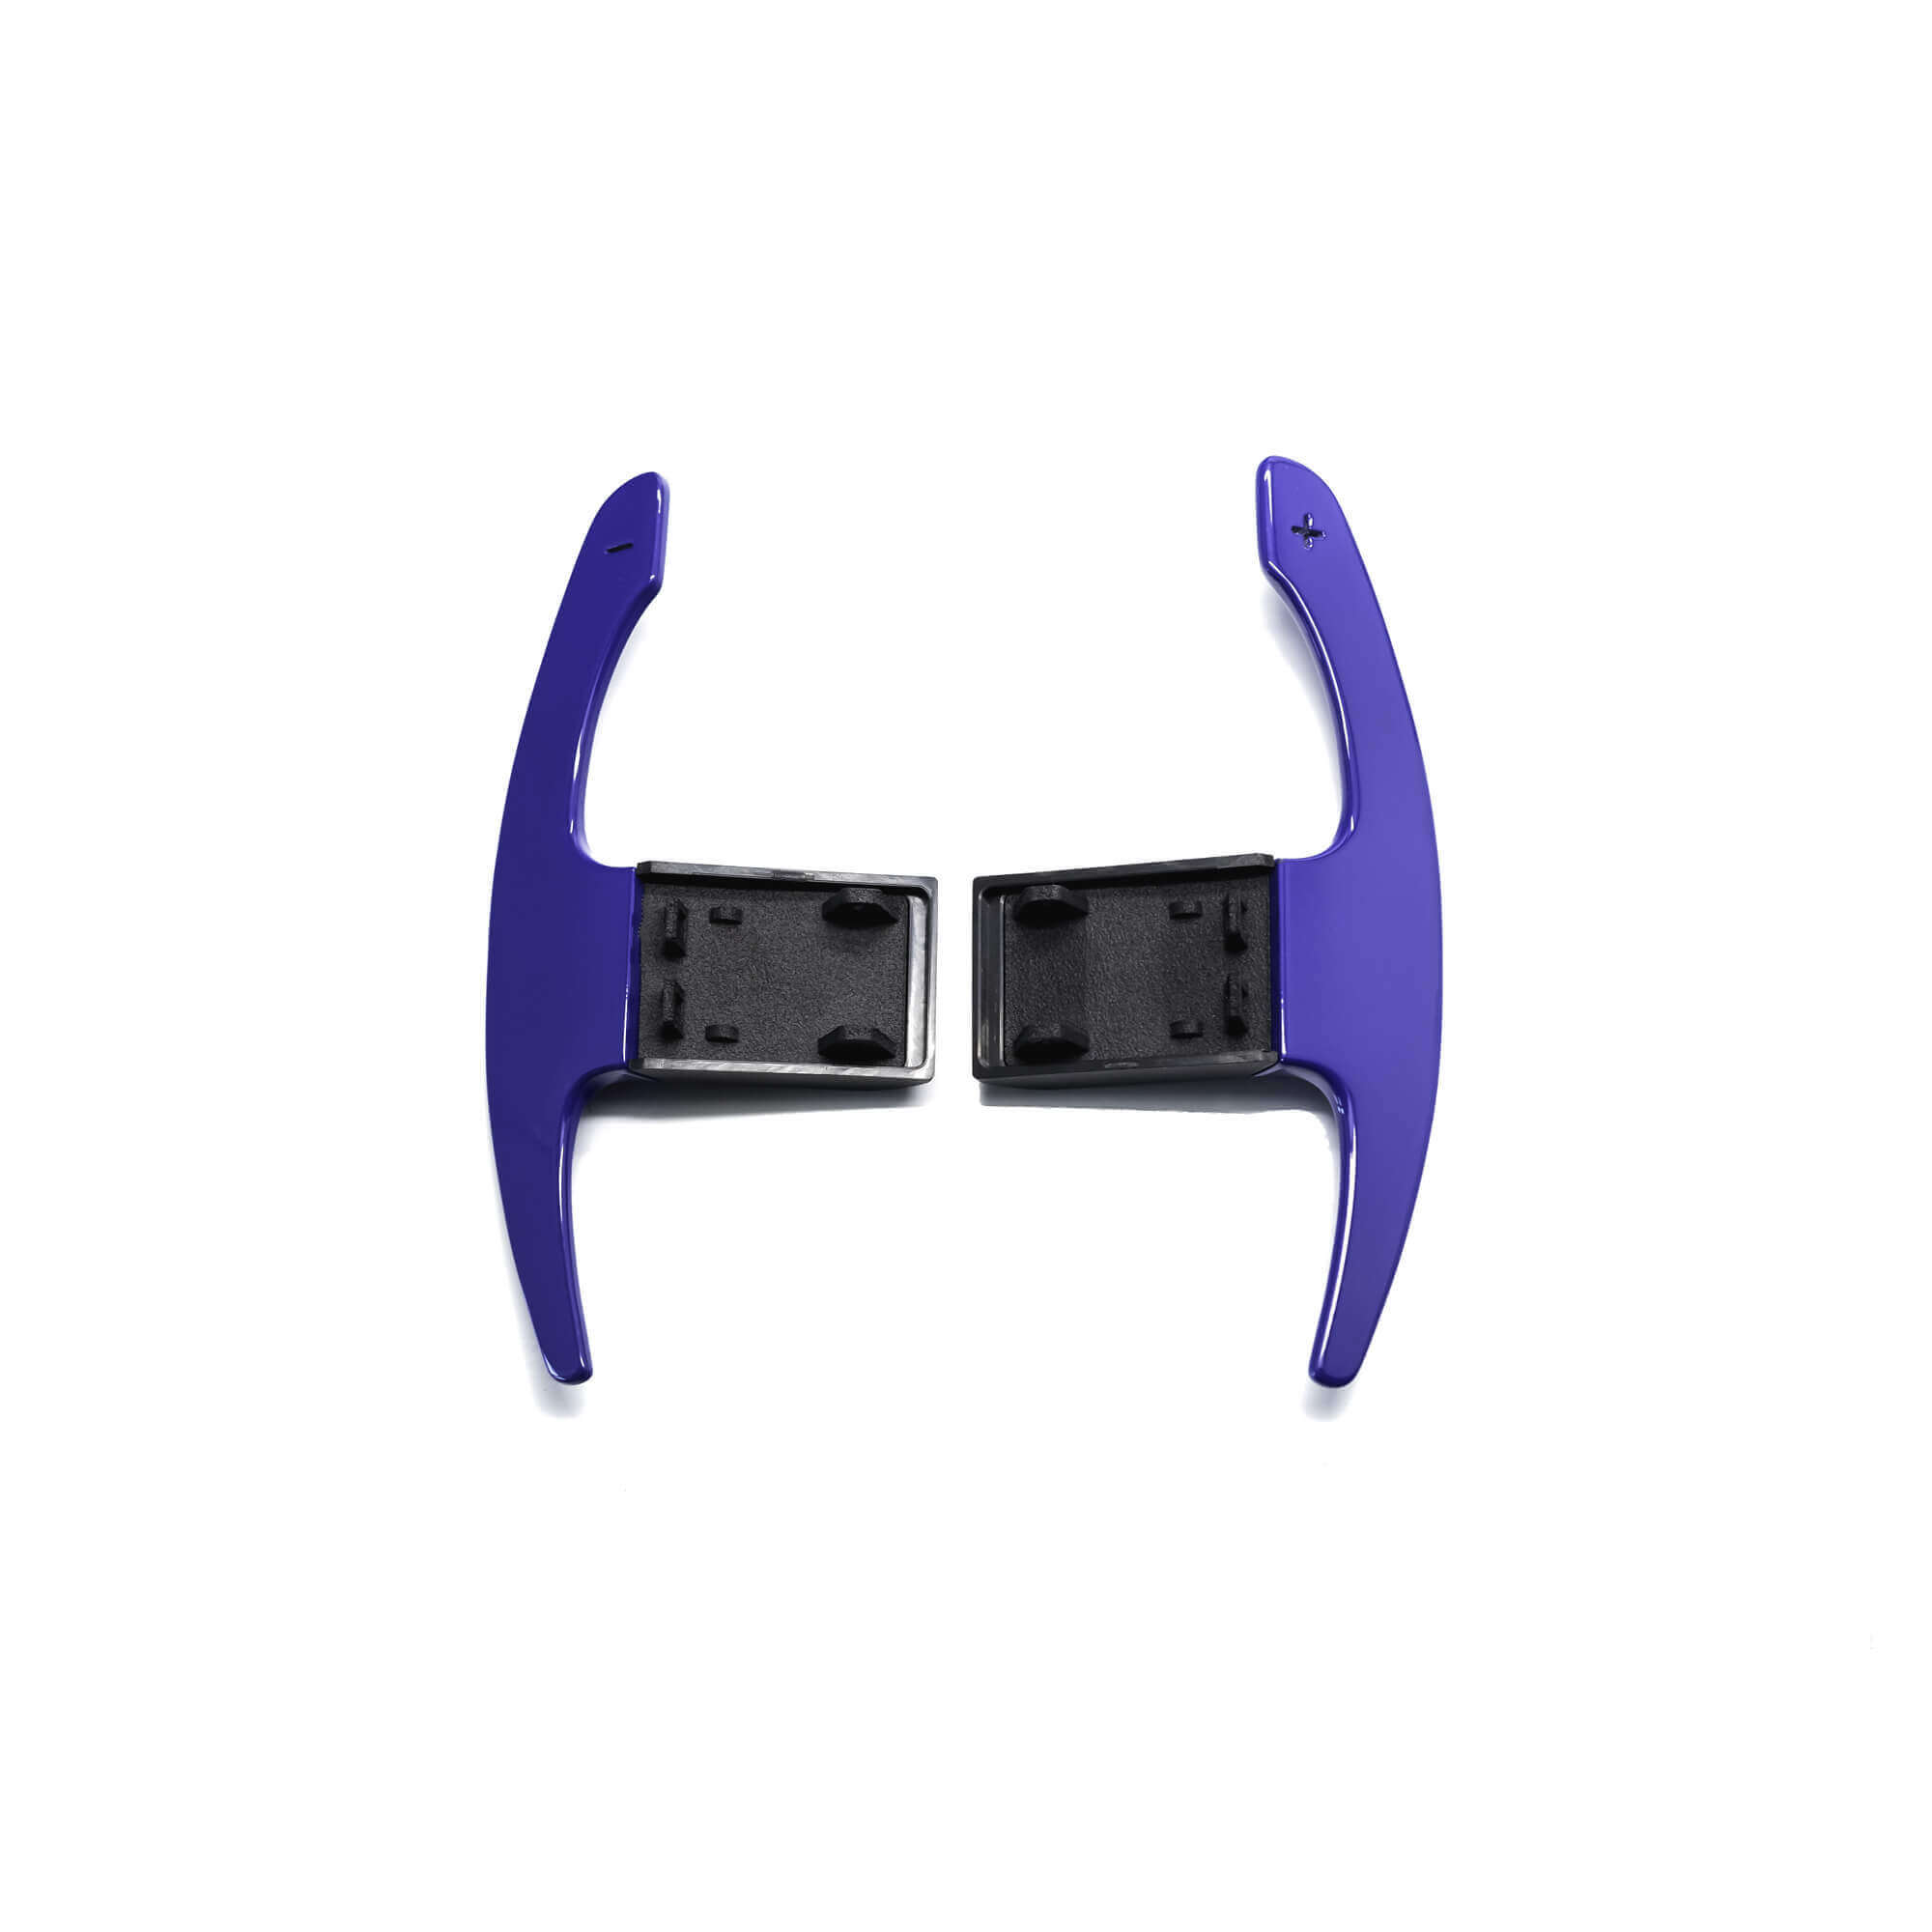 Paddle Shifters - Aluminium Schaltwippen - Individuelle Farbe